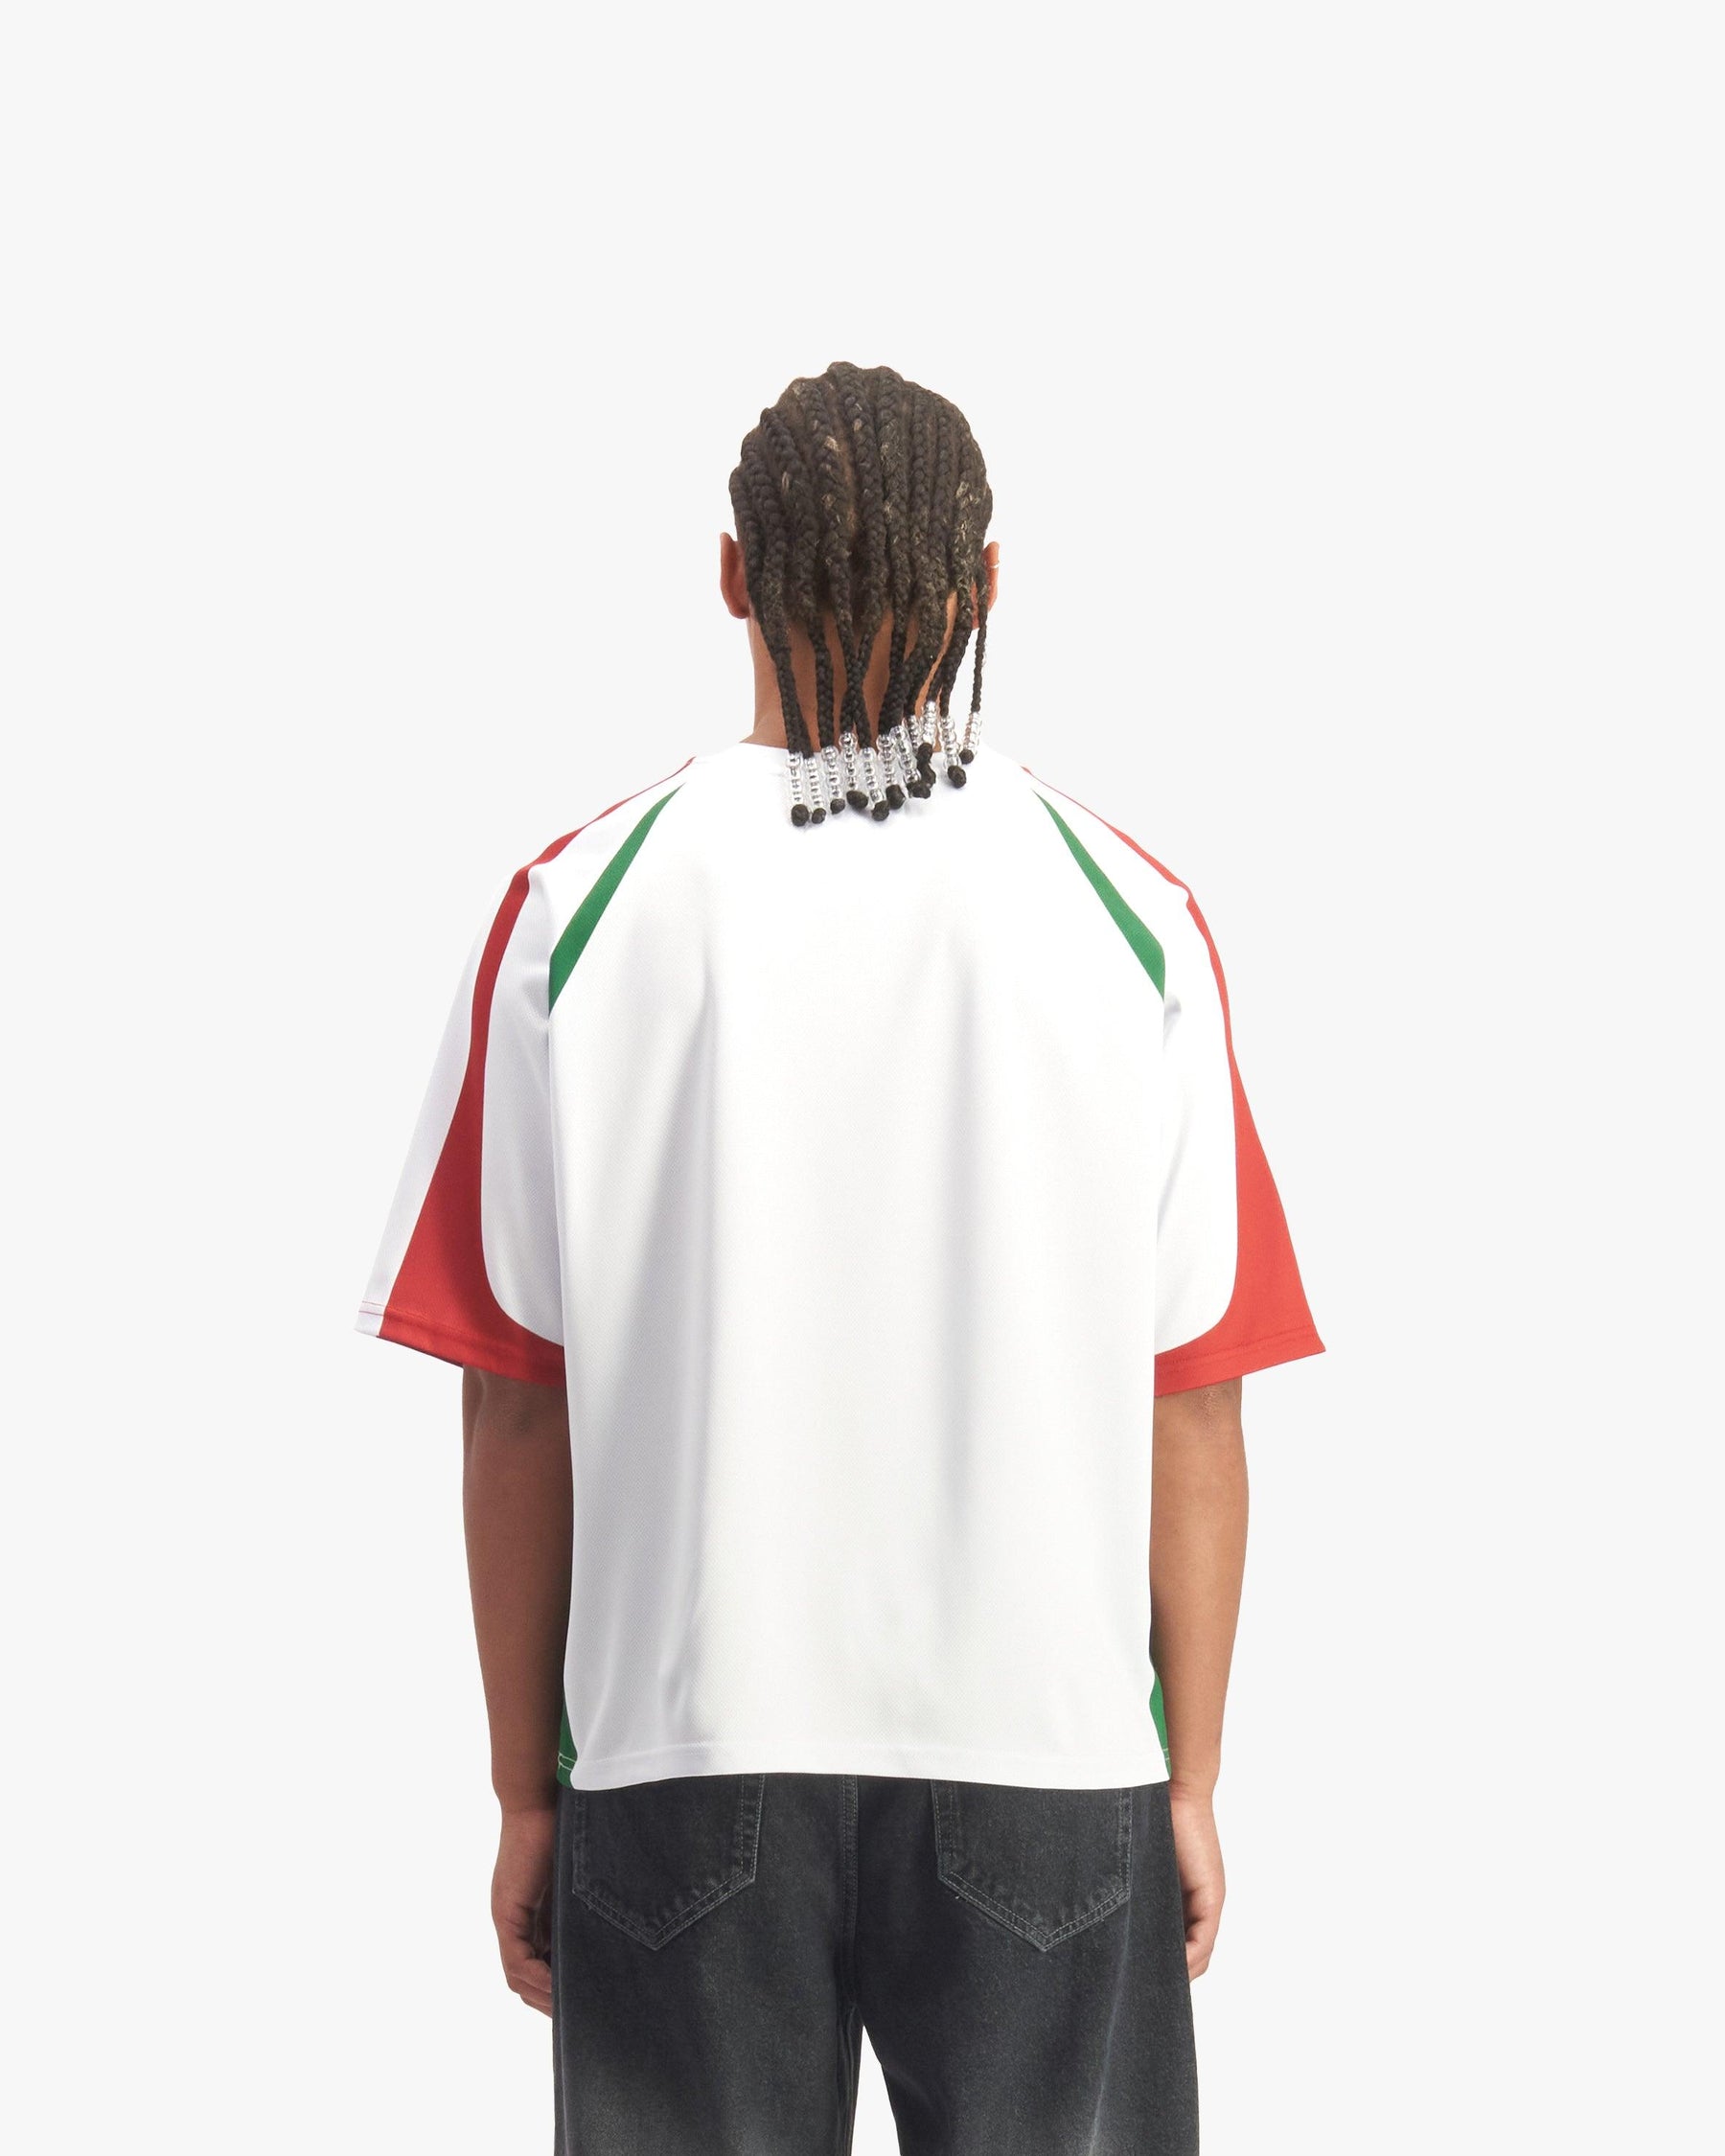 PORTUGAL JERSEY